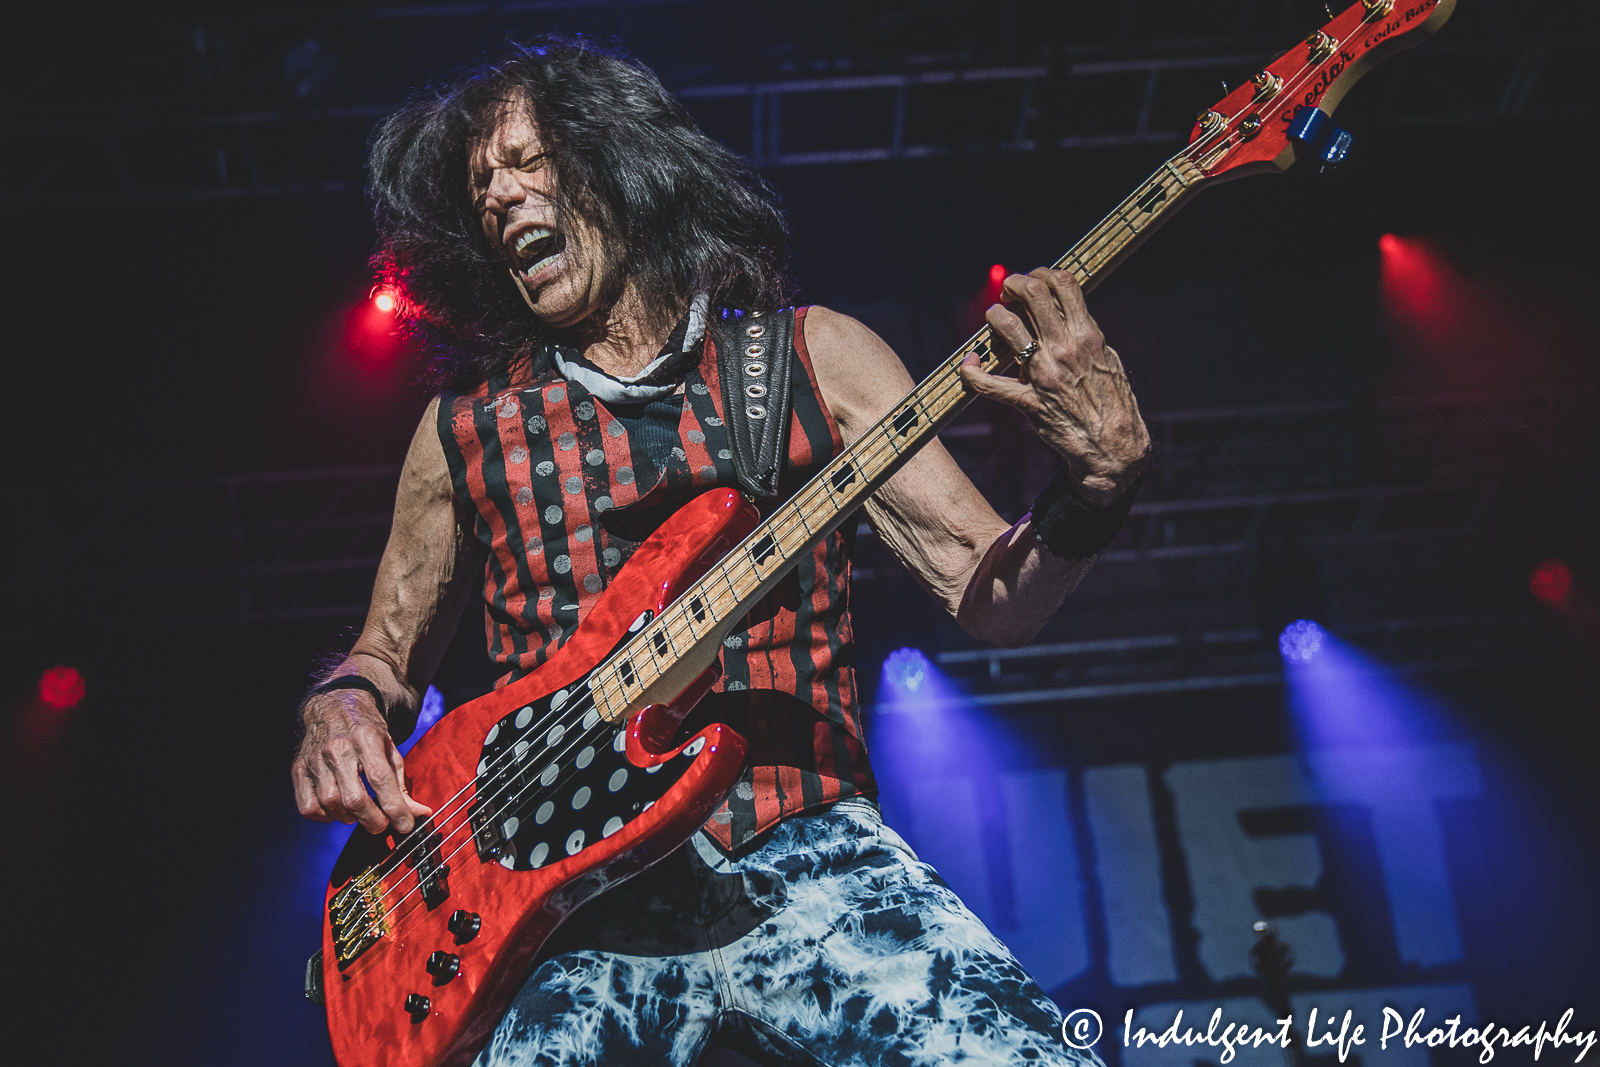 Live concert featuring bass guitarist Rudy Sarzo and his band Quiet Riot at Ameristar Casino's Star Pavilion in Kansas City, MO on July 29, 2022.